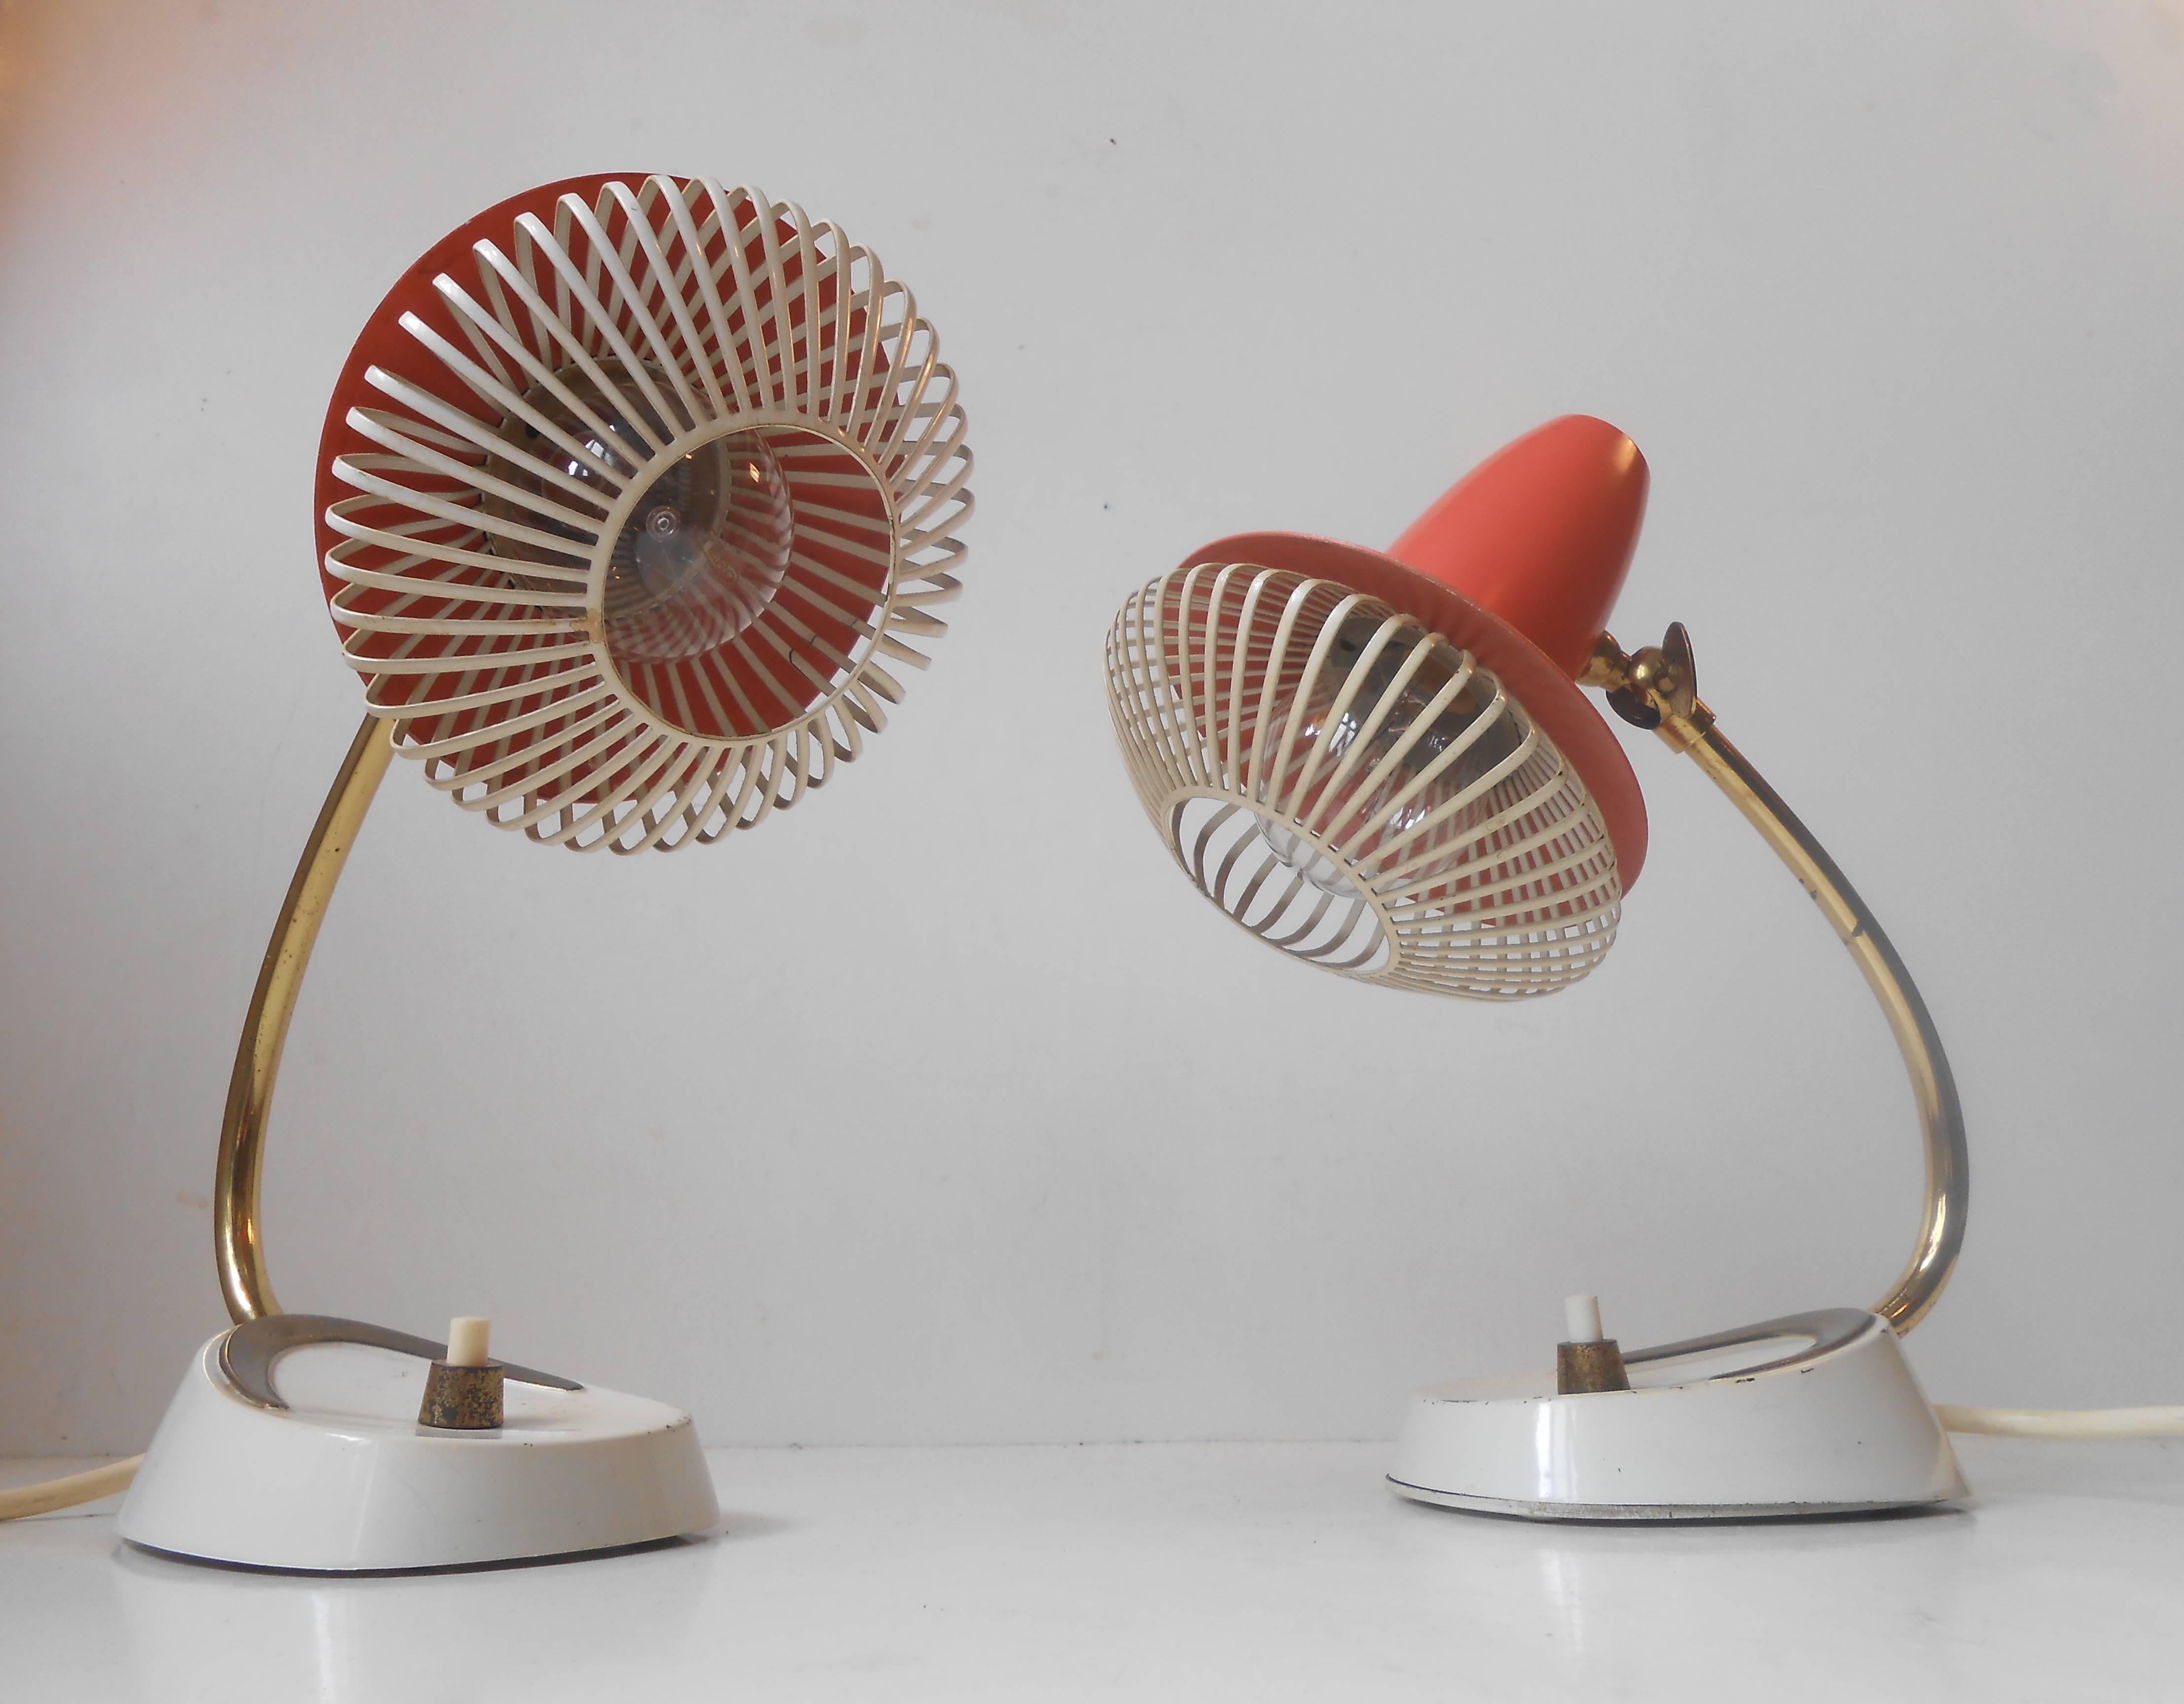 A pair of night table lamps with clay-red shading, brass Boomerang base details and light-softening shade baskets, possibly Swiss made in the style of Stilnovo. Measurements: H 9.5 inches (23.5 cm), D: (shades) 5.5 inches (13 cm). The price is for